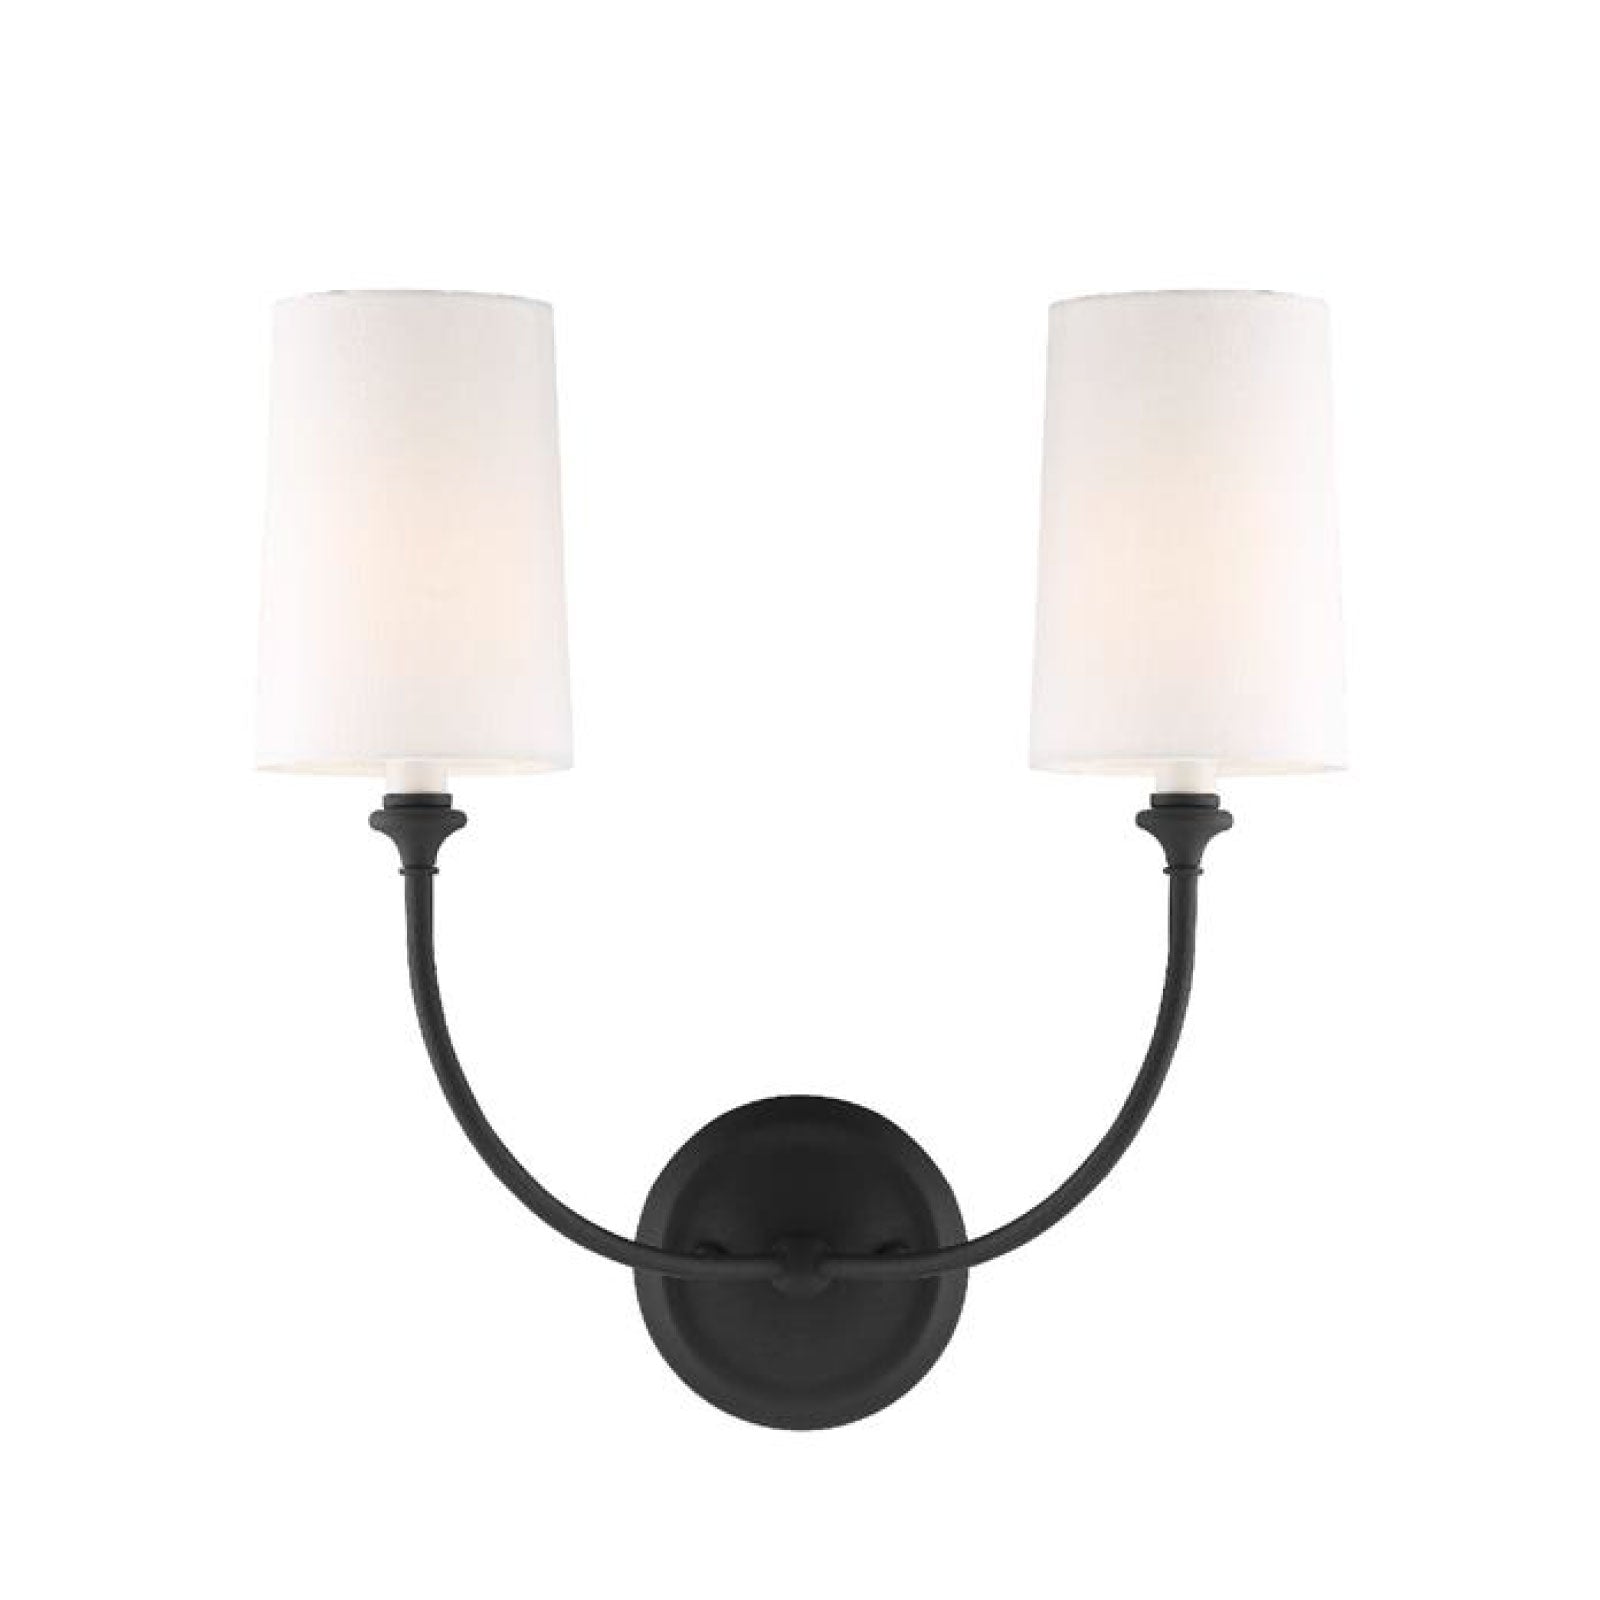 Abrams Double Sconce in Forged Black